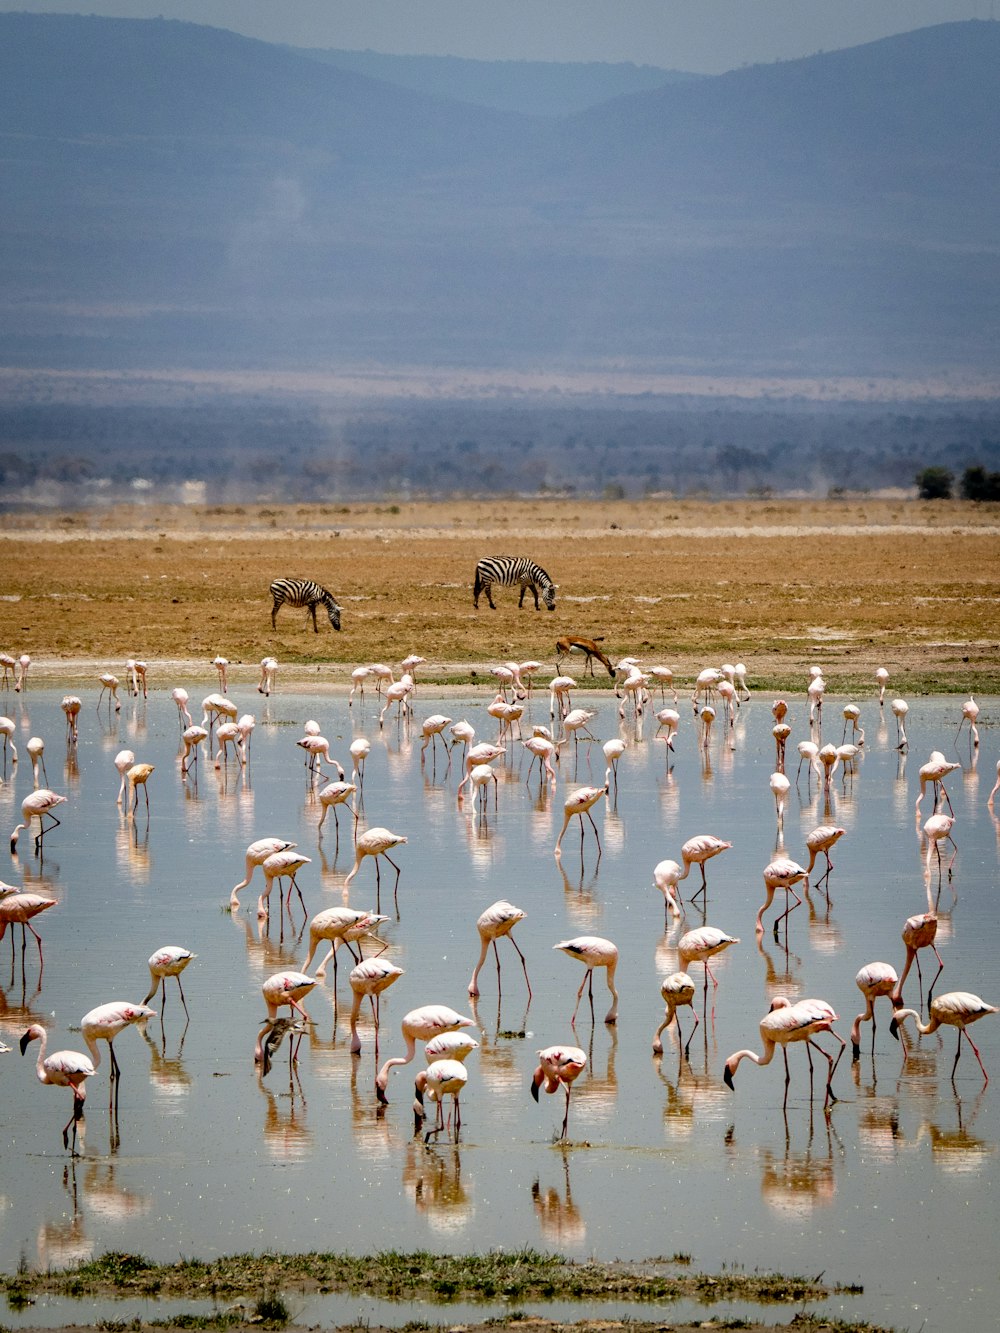 a large group of flamingos in a large body of water